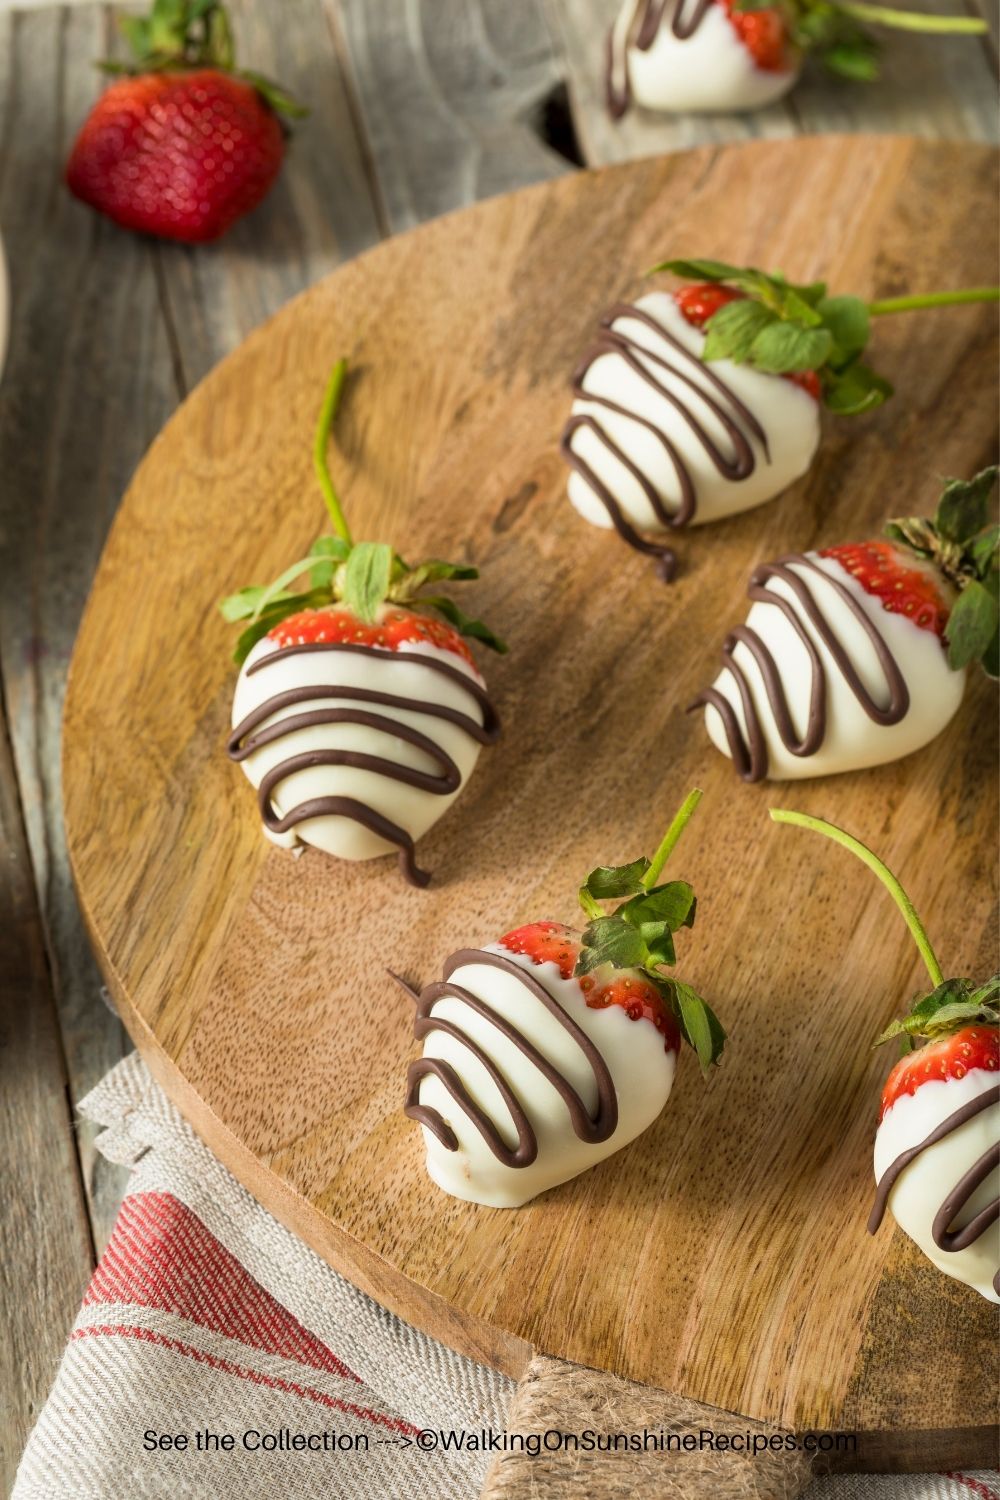 Strrawberries dipped in white chocoalte with chocolate drizzle. 